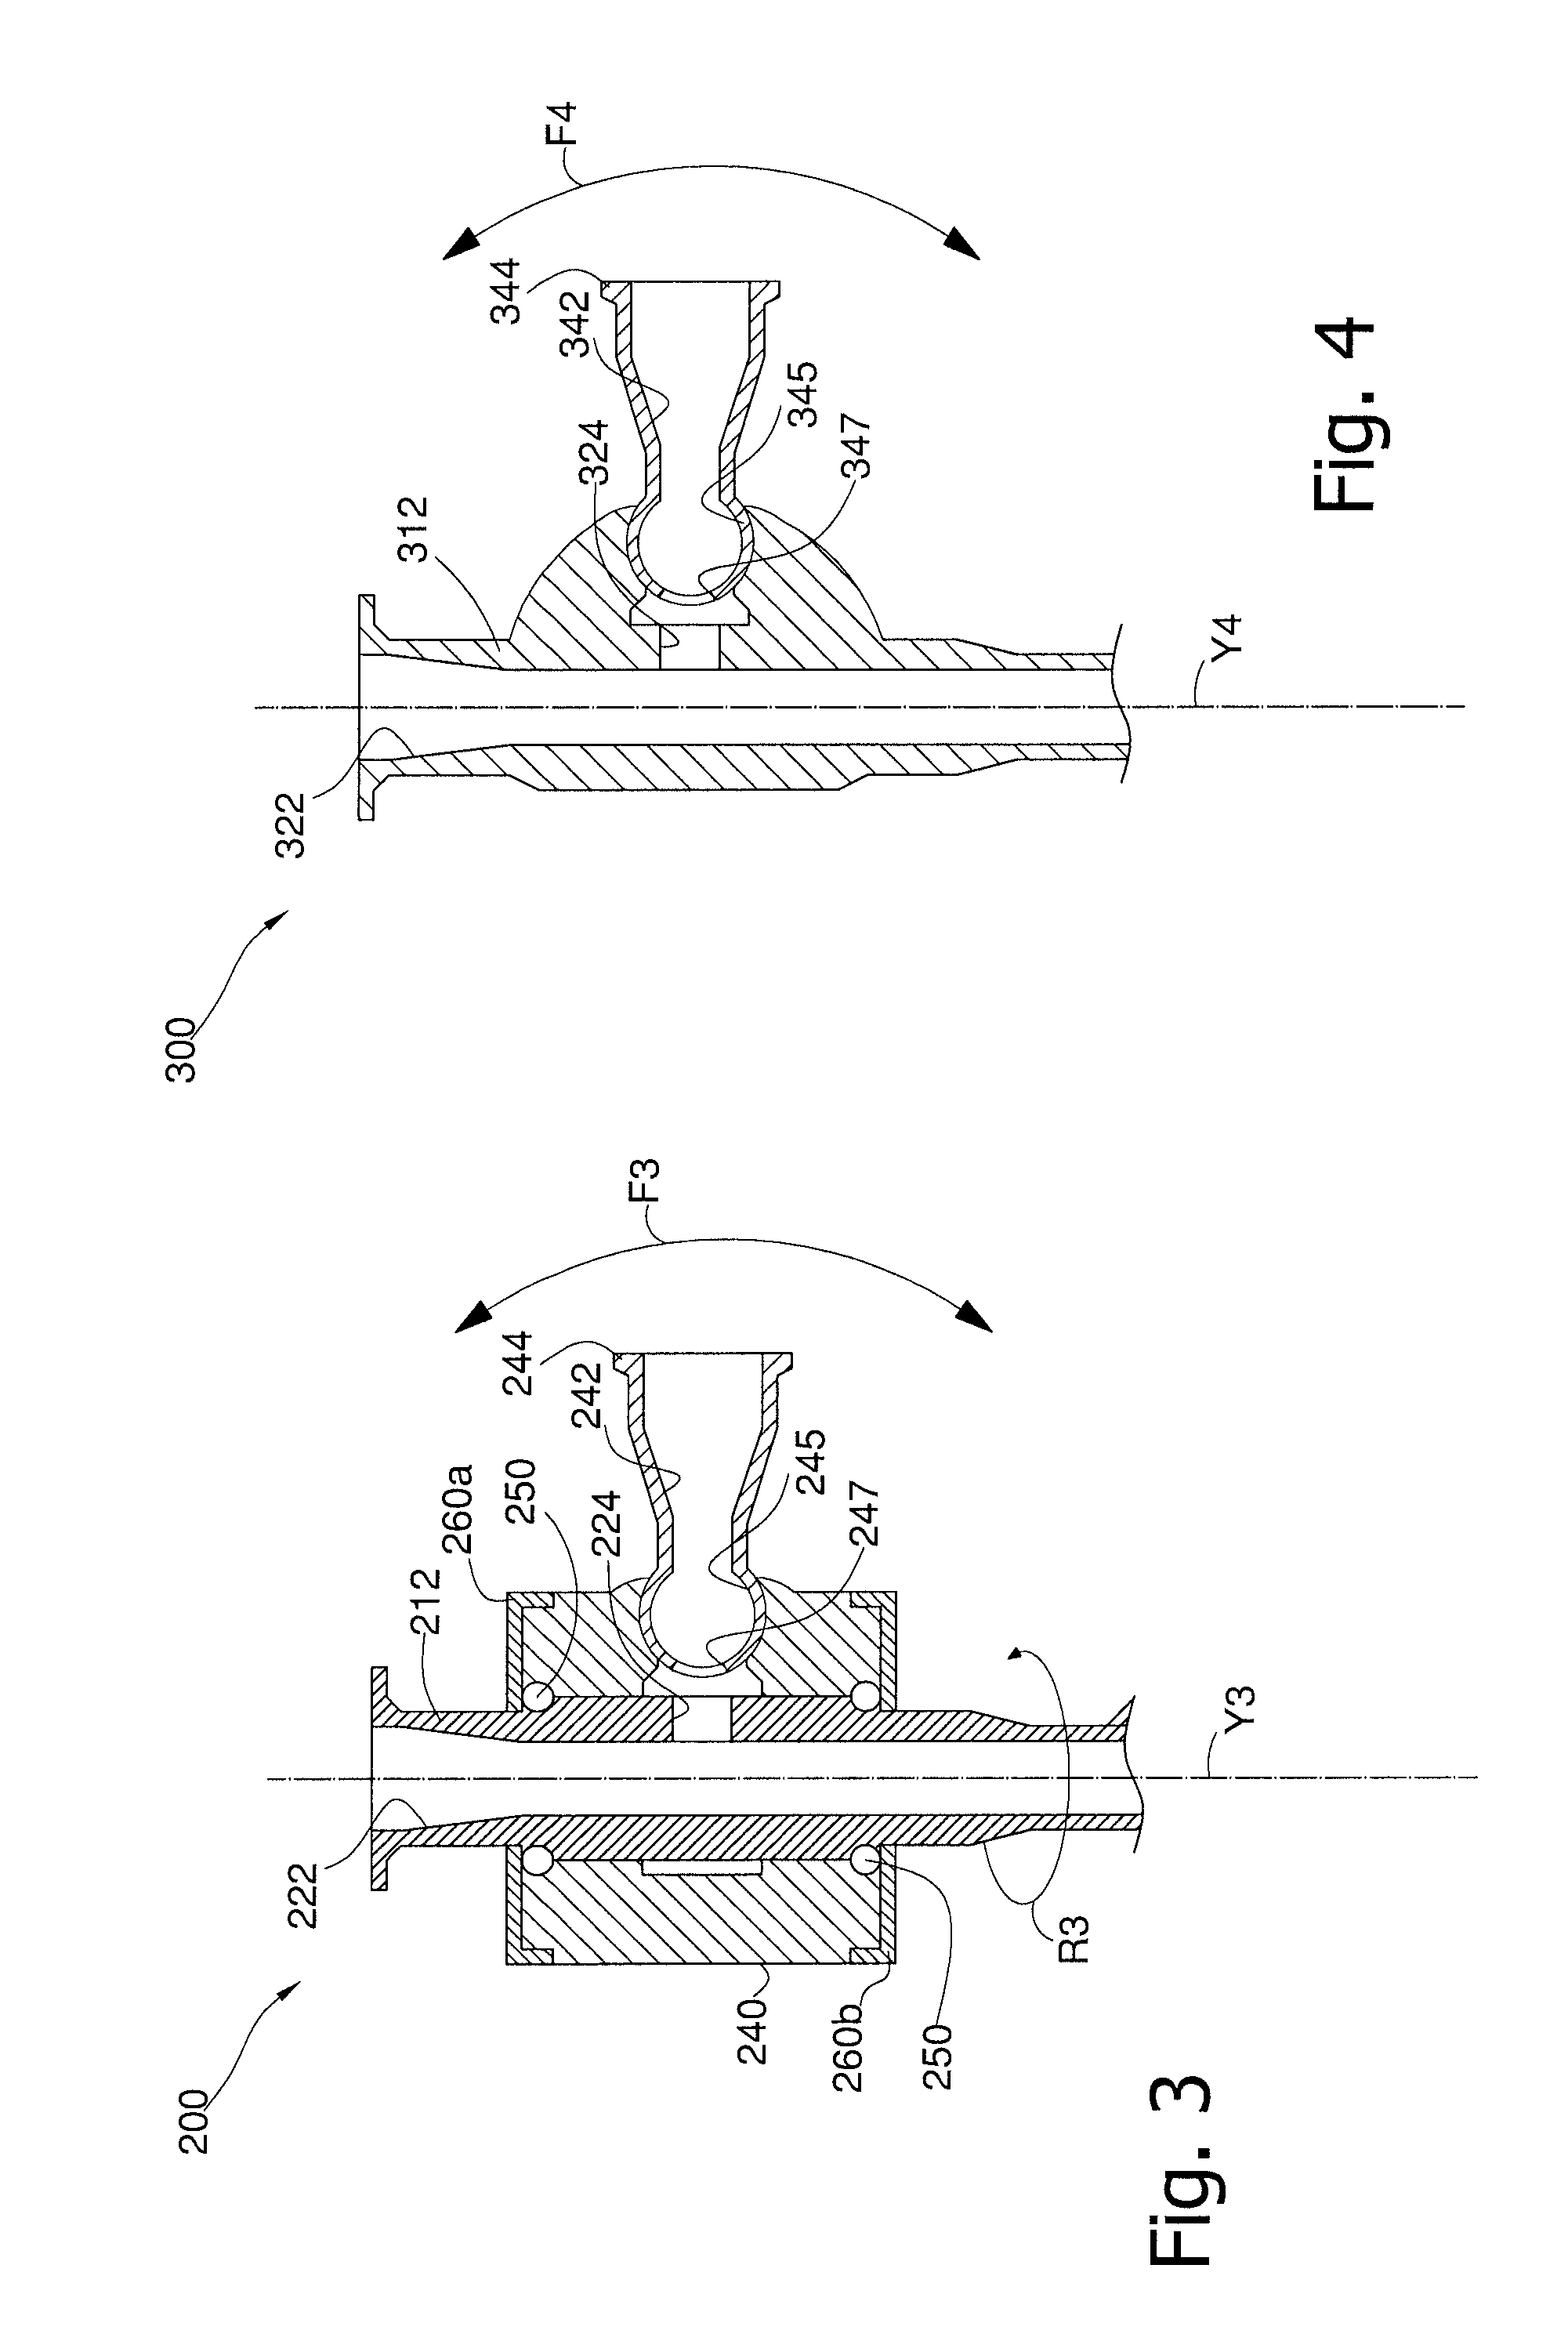 Surgical device for injecting cement in a bone cavity